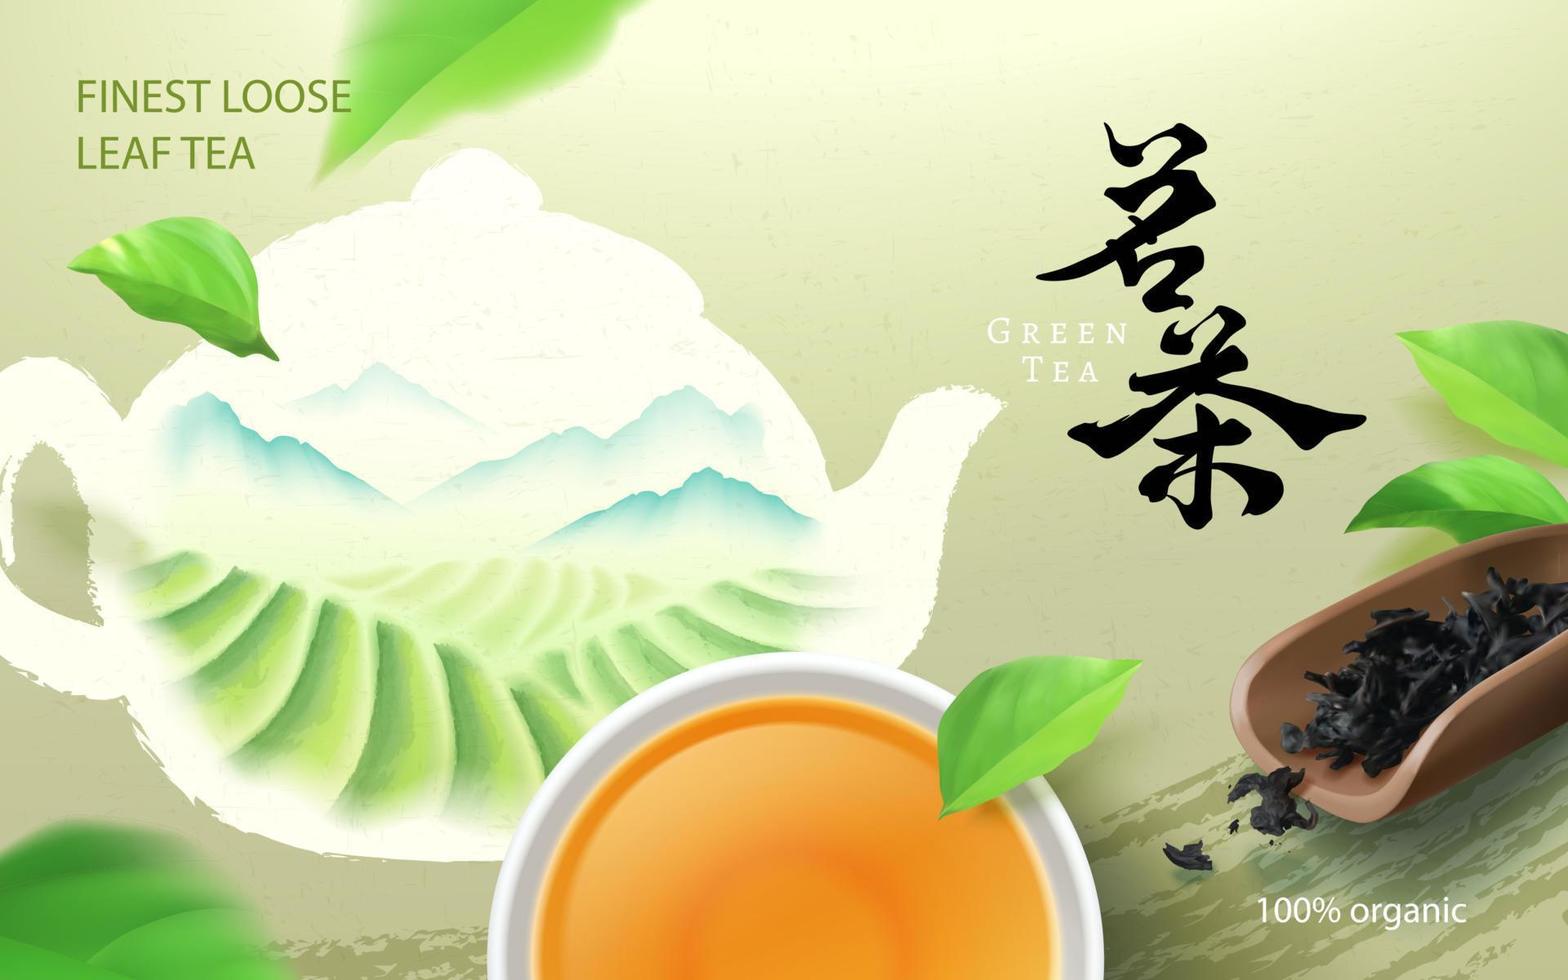 Ad layout design. Tea plantation theme watercolor framed in teapot shape with 3d teacup and tea spoon viewed from above. Translation, Premium tea. vector